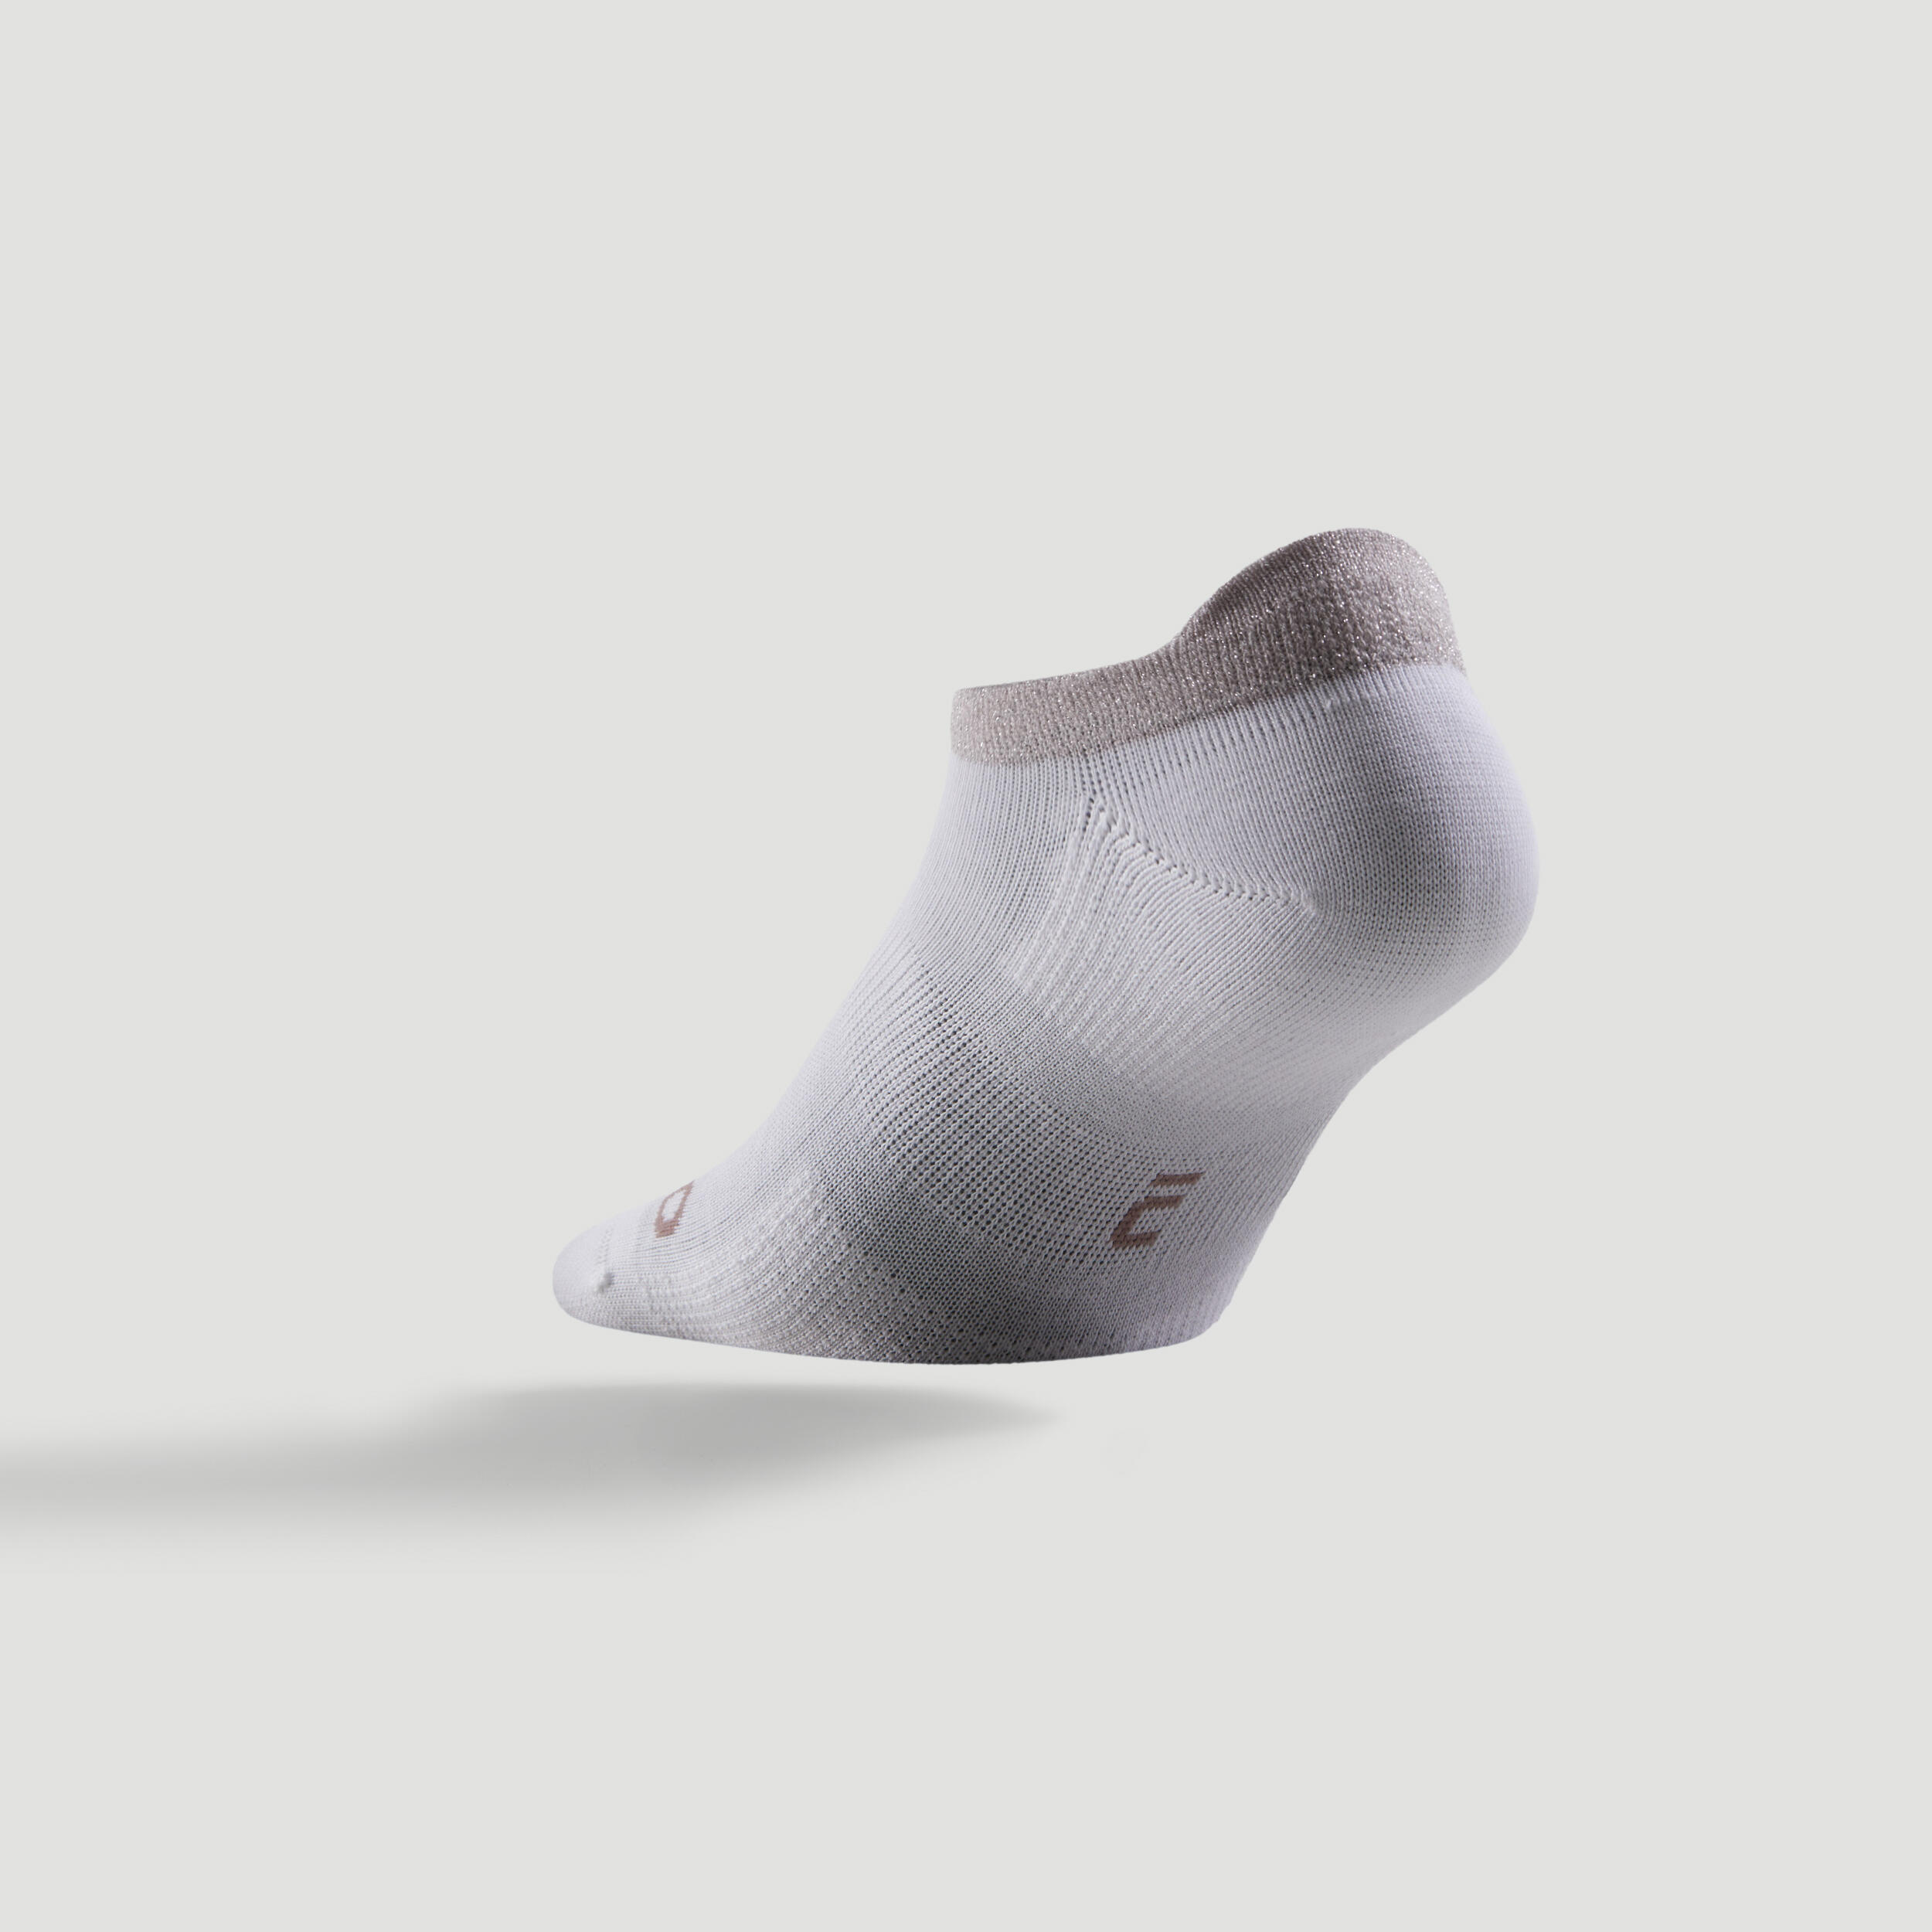 Low Sports Socks RS 160 Tri-Pack - Glossy White 6/14